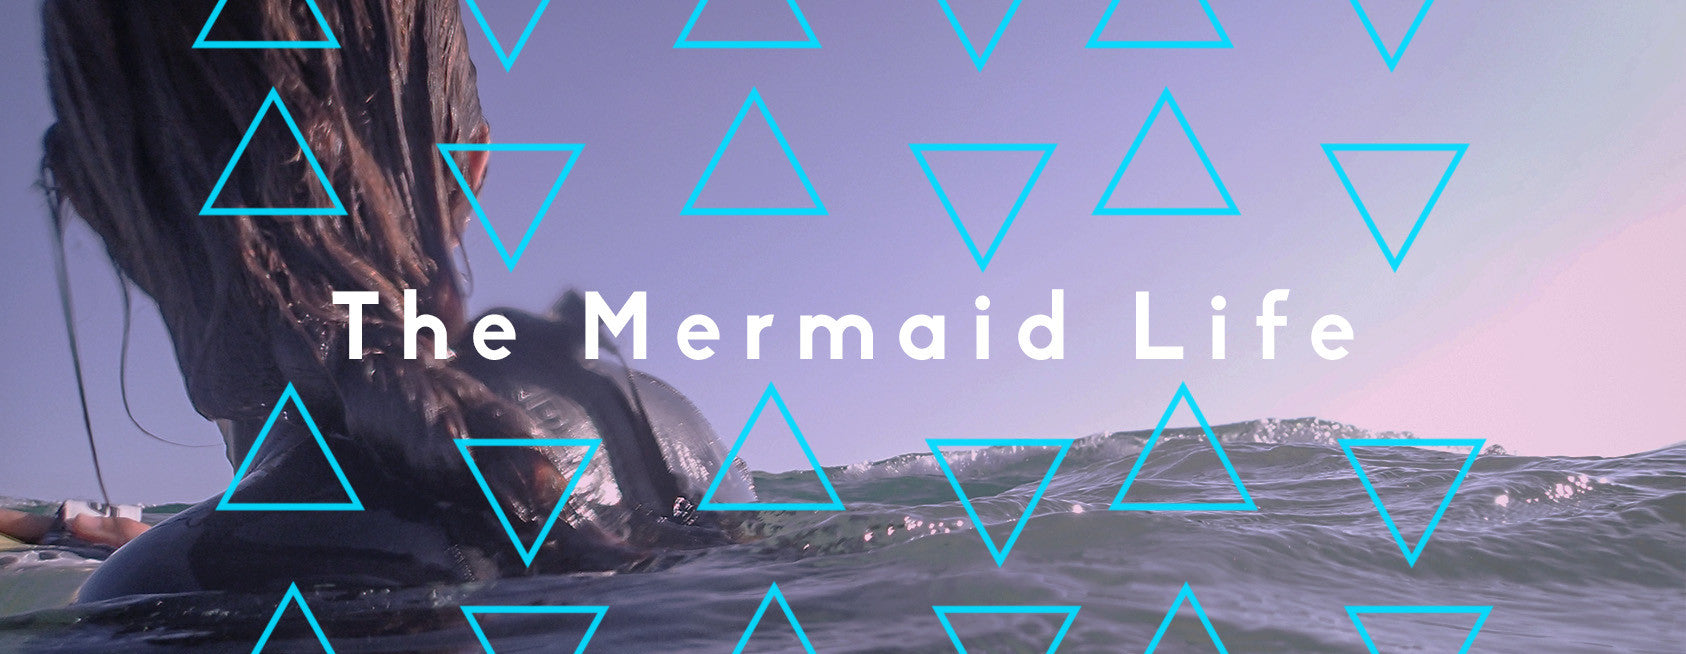 7 Signs You Might Be a Mermaid